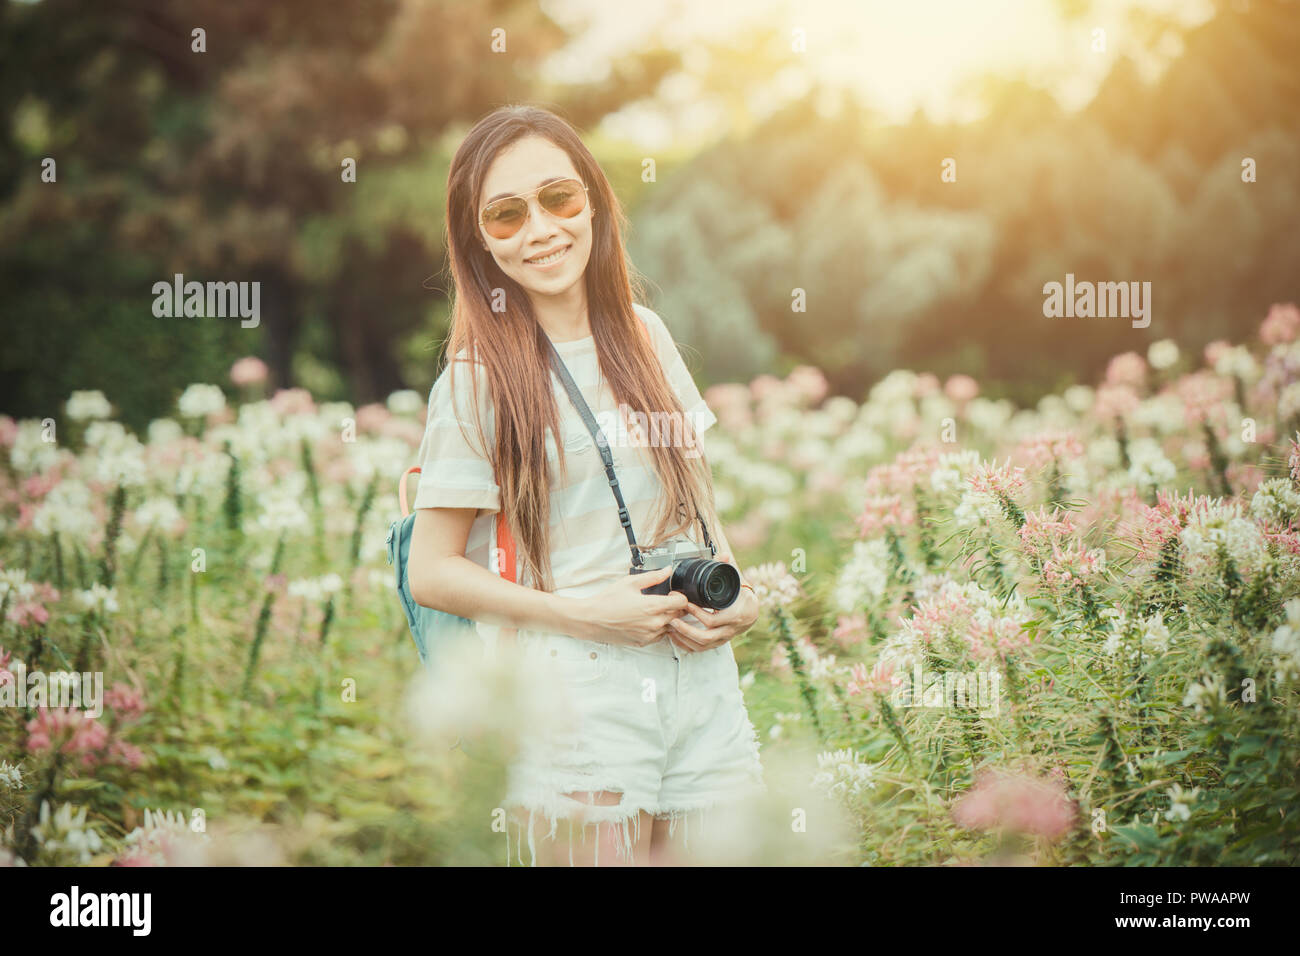 asian girl relax enjoy holiday with photography flower hobby in the park vintage color tone Stock Photo